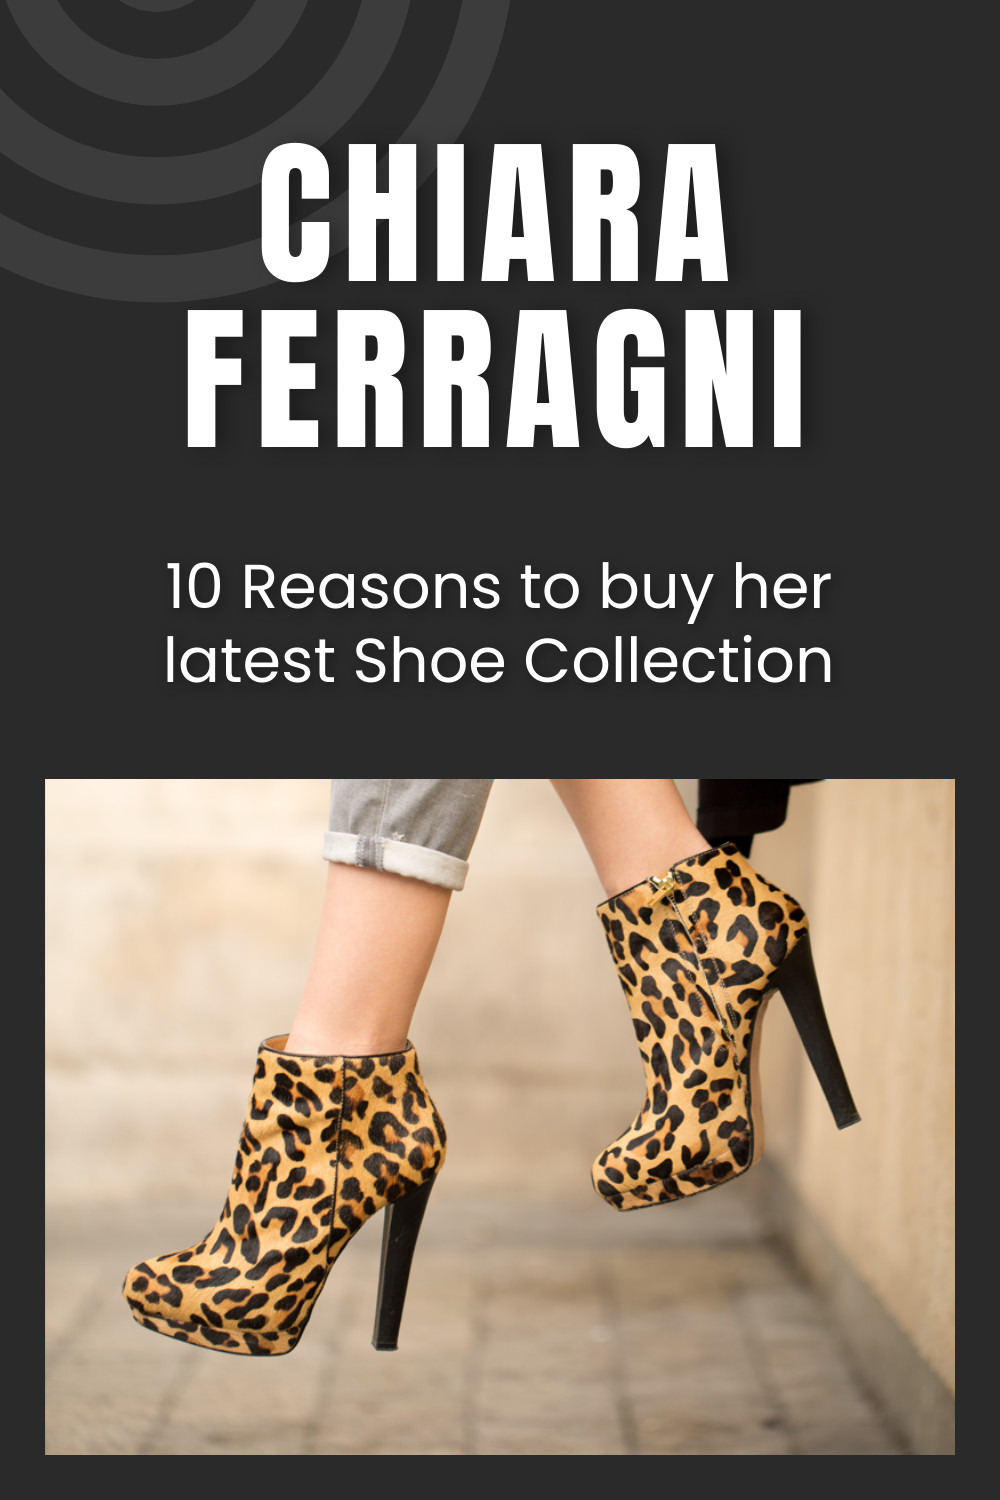 10 Reasons to Buy Female Shoes